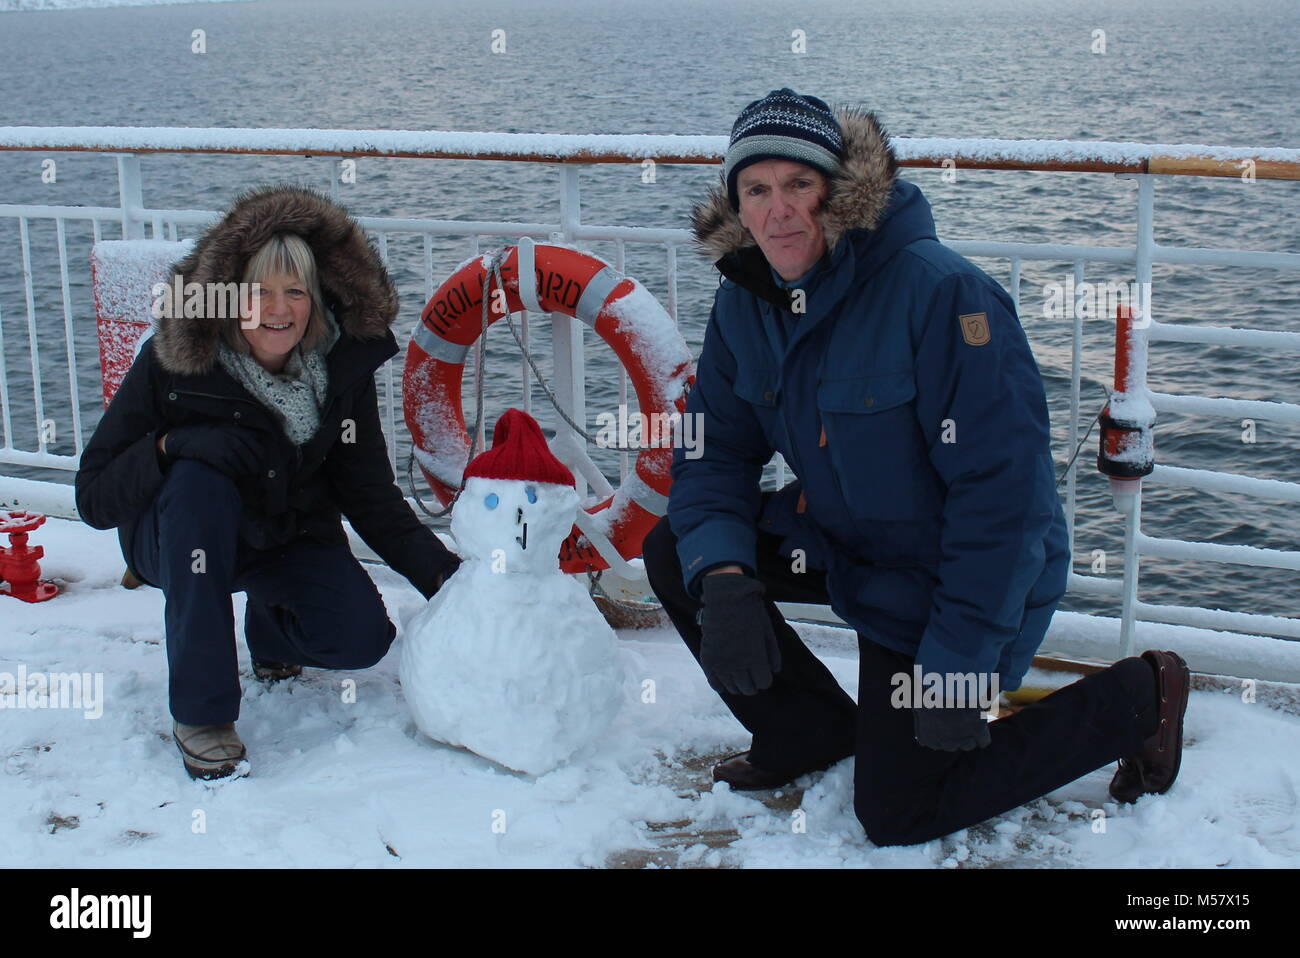 Stowaway snowman joins couple wearing parkas on Hurtigruten winter cruise in the fjords in Norway with lifebelt and snow on deck Stock Photo